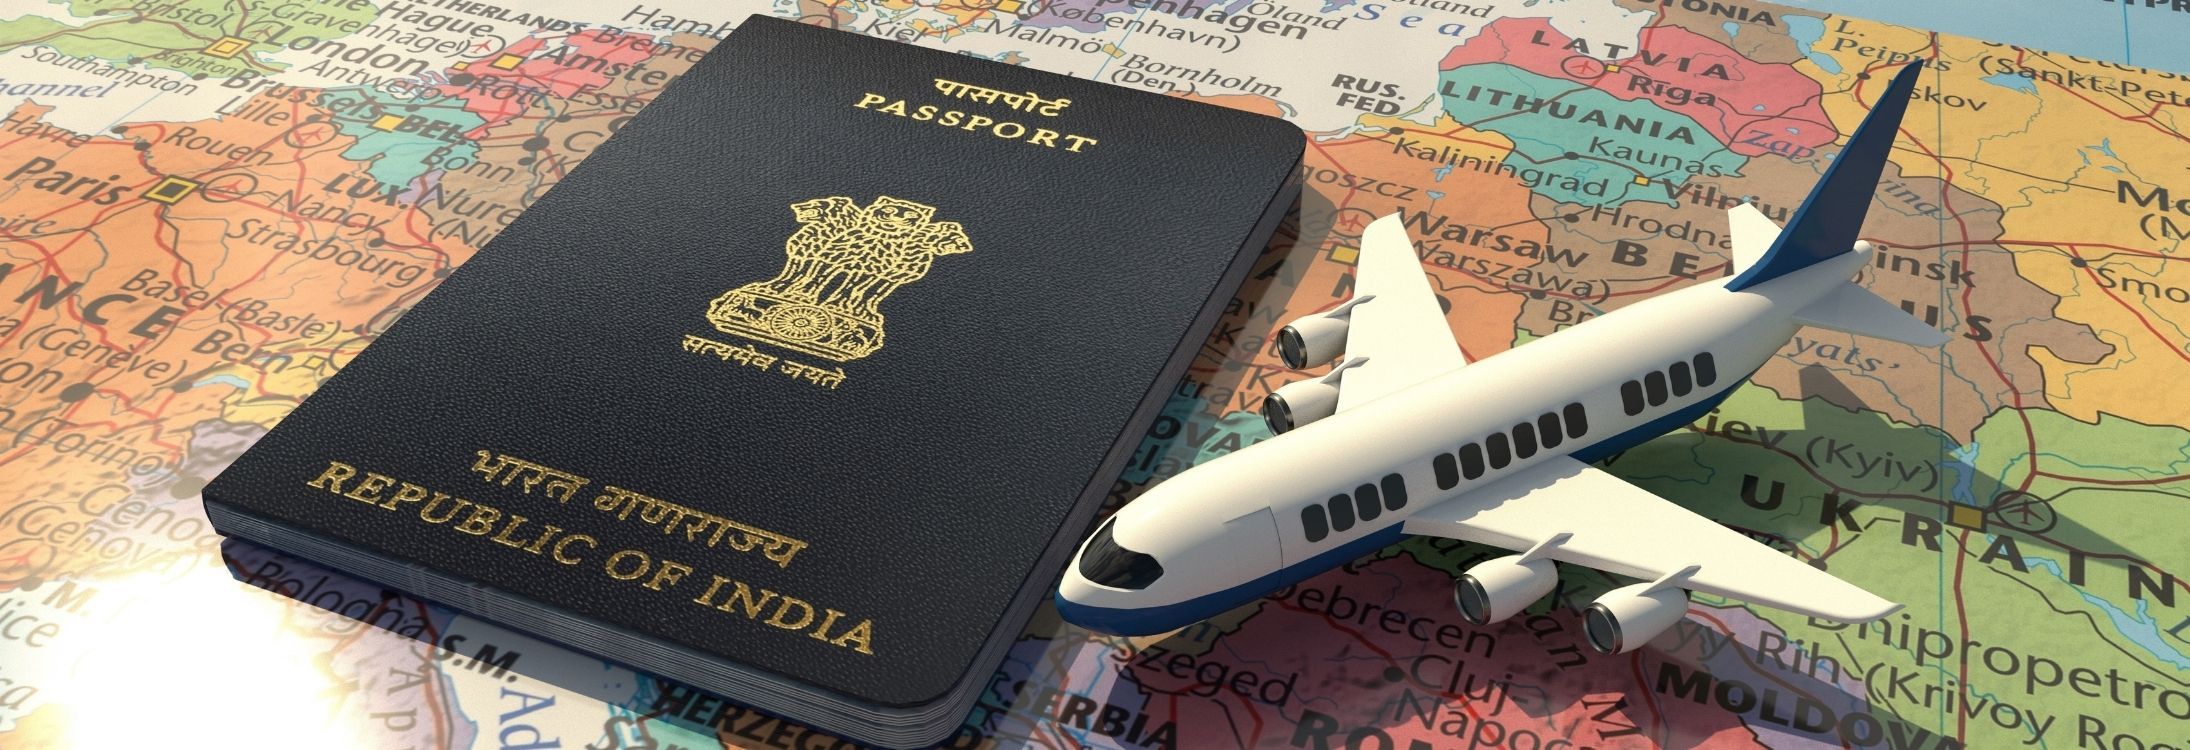 India’s Passport Power Ranking has improved in 2019